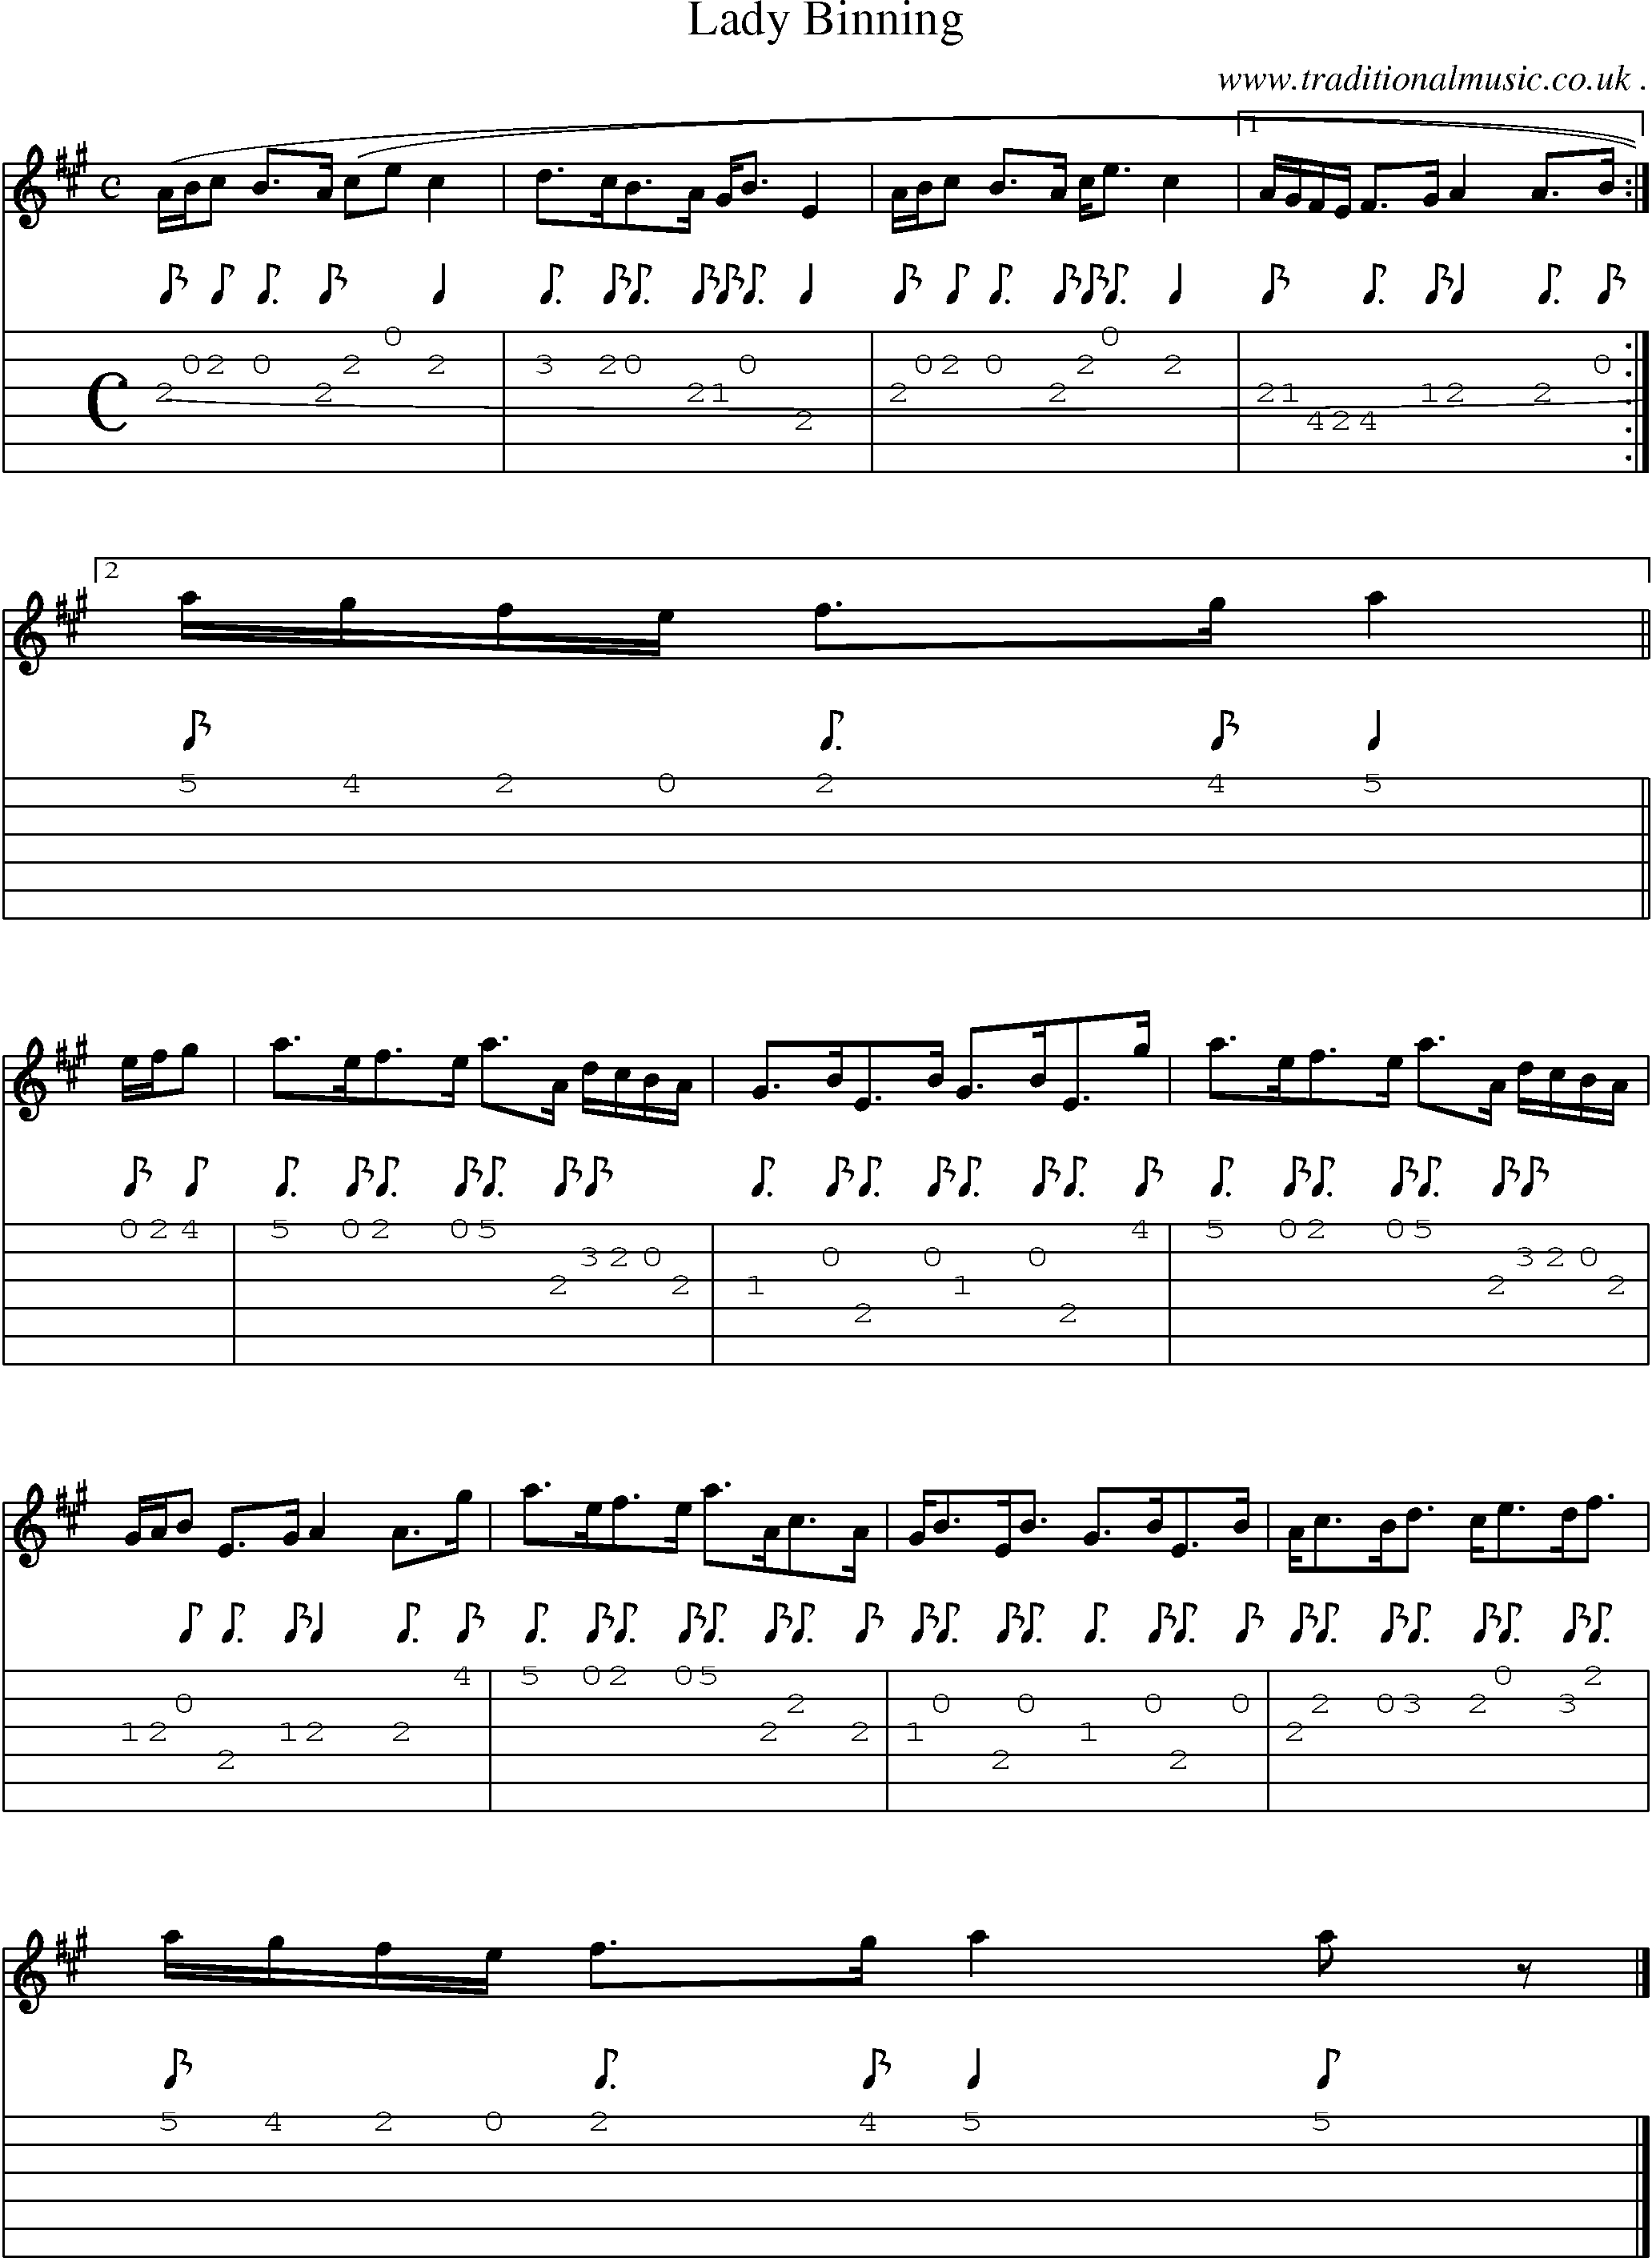 Sheet-music  score, Chords and Guitar Tabs for Lady Binning